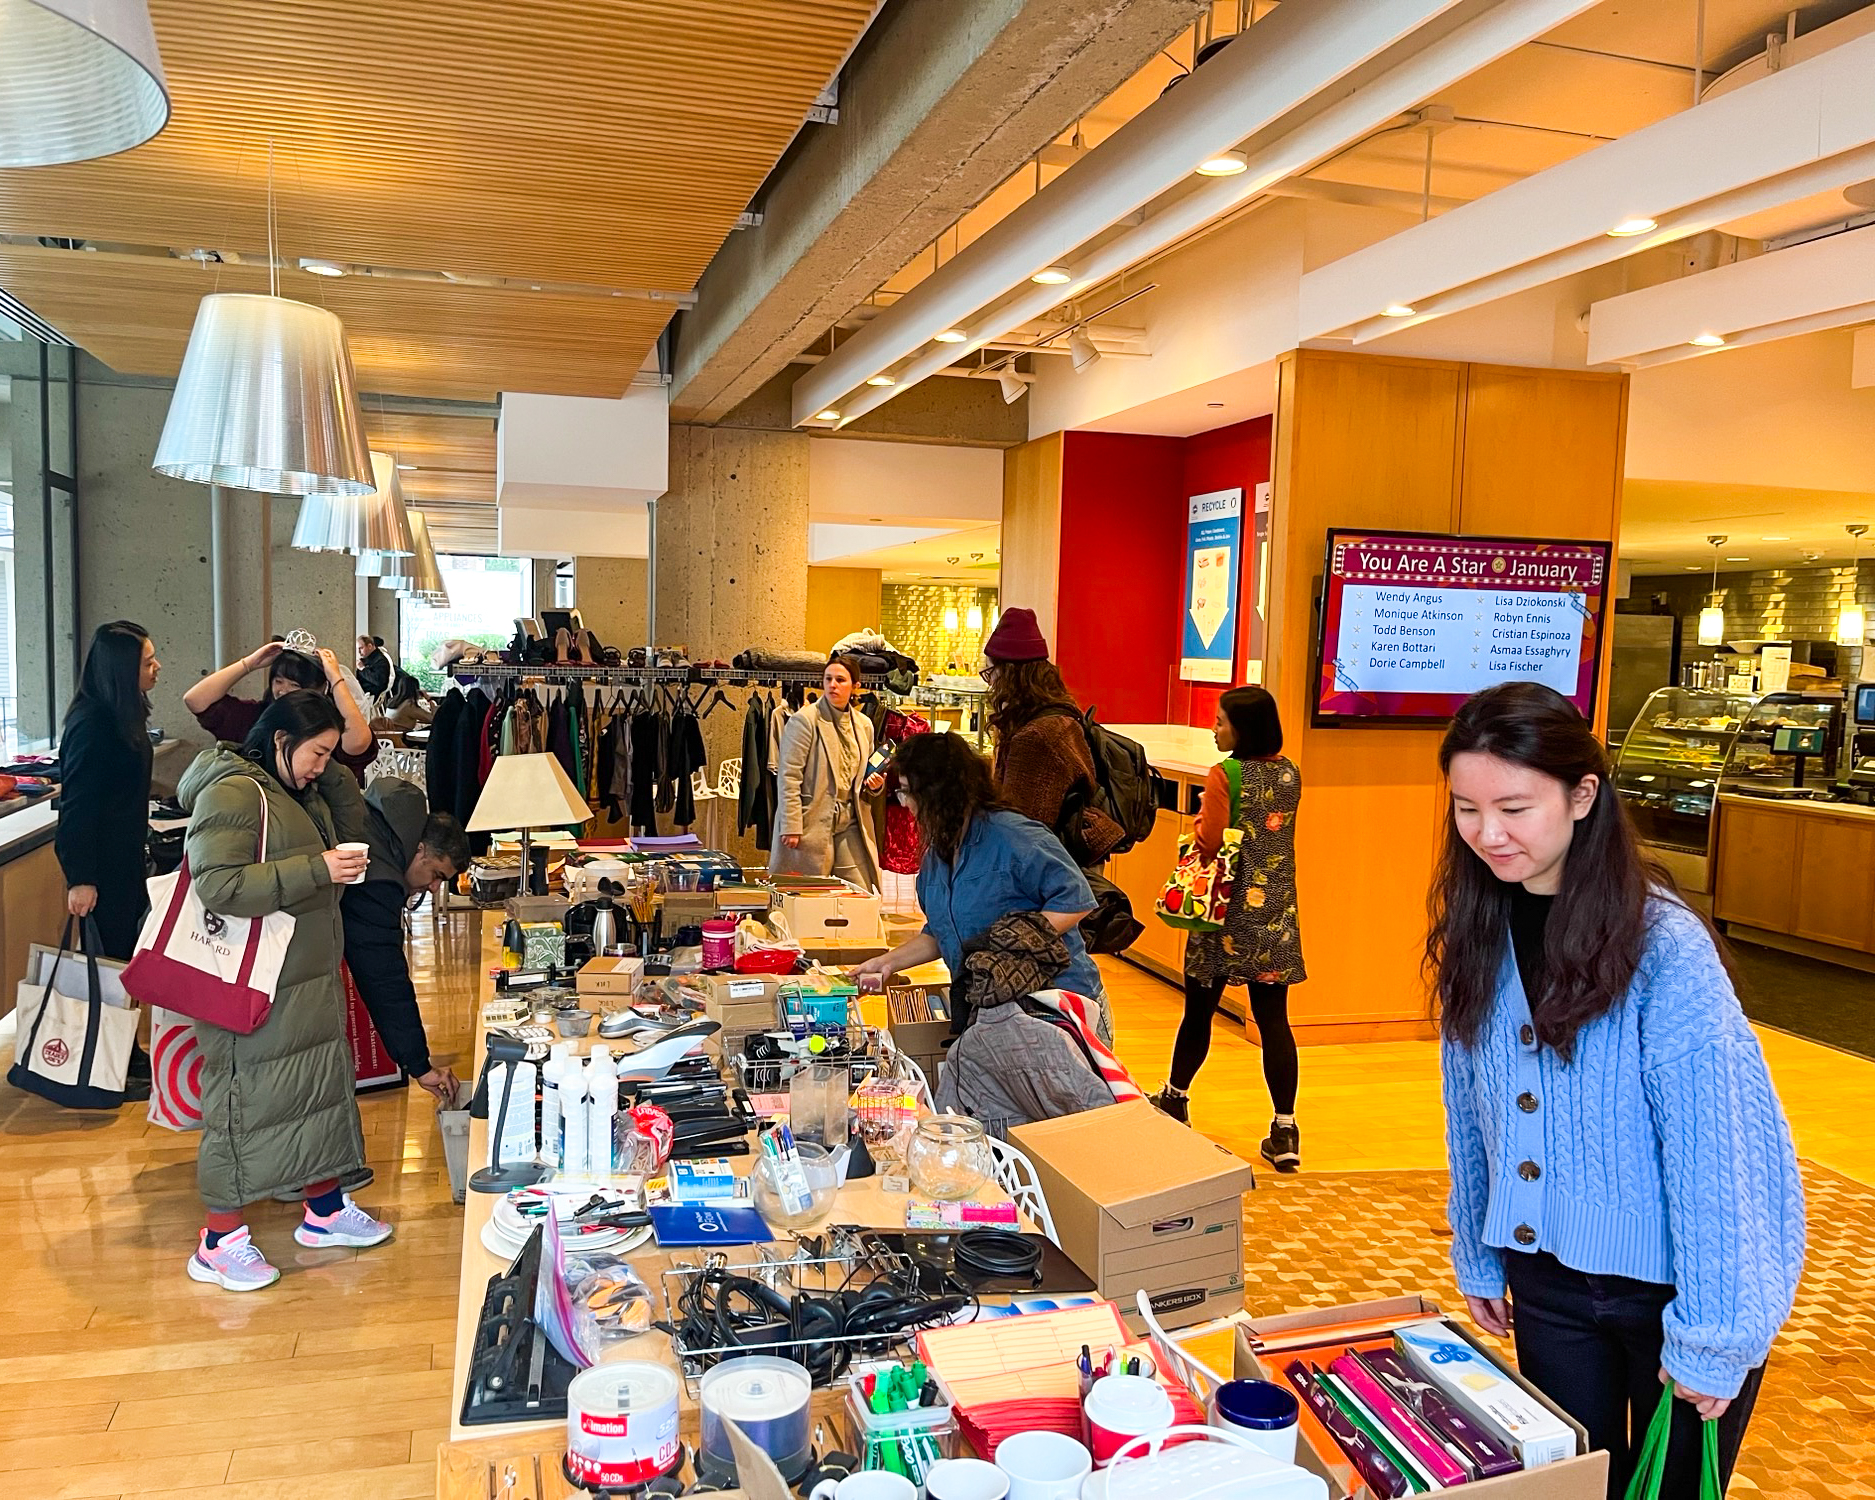 Students shop from a table of donated items at a "freecycle" event at Harvard.